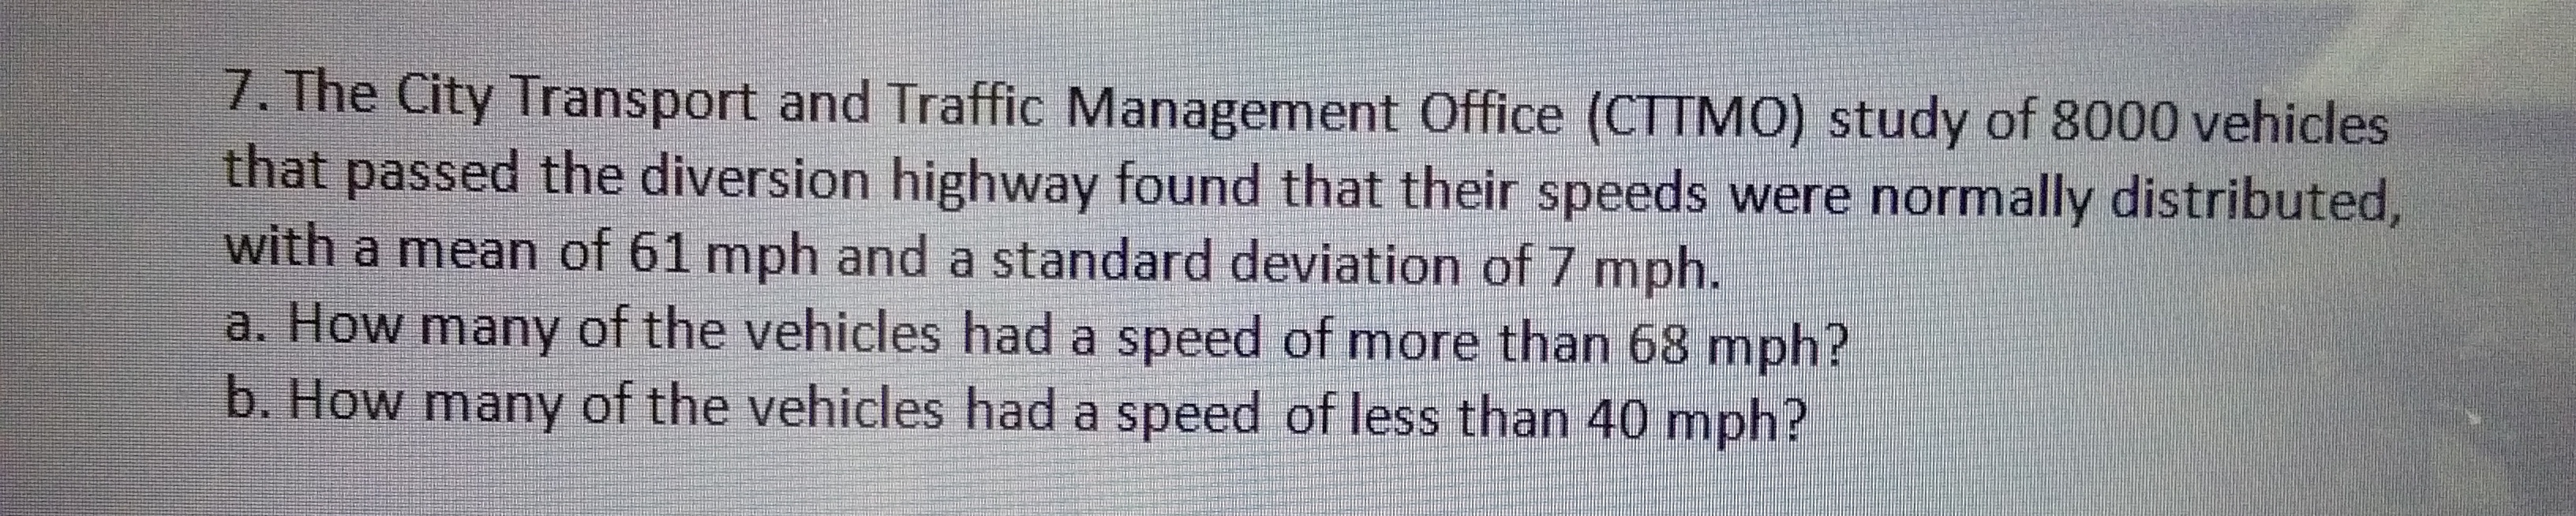 7. The City Transport and Traffic Management Office (CTTMO) study of 8000 vehicles
that passed the diversion highway found that their speeds were normally distributed,
with a mean of 61 mph and a standard deviation of 7 mph.
a. How many of the vehicles had a speed of more than 68 mph?
b. How many of the vehicles had a speed of less than 40 mph?
